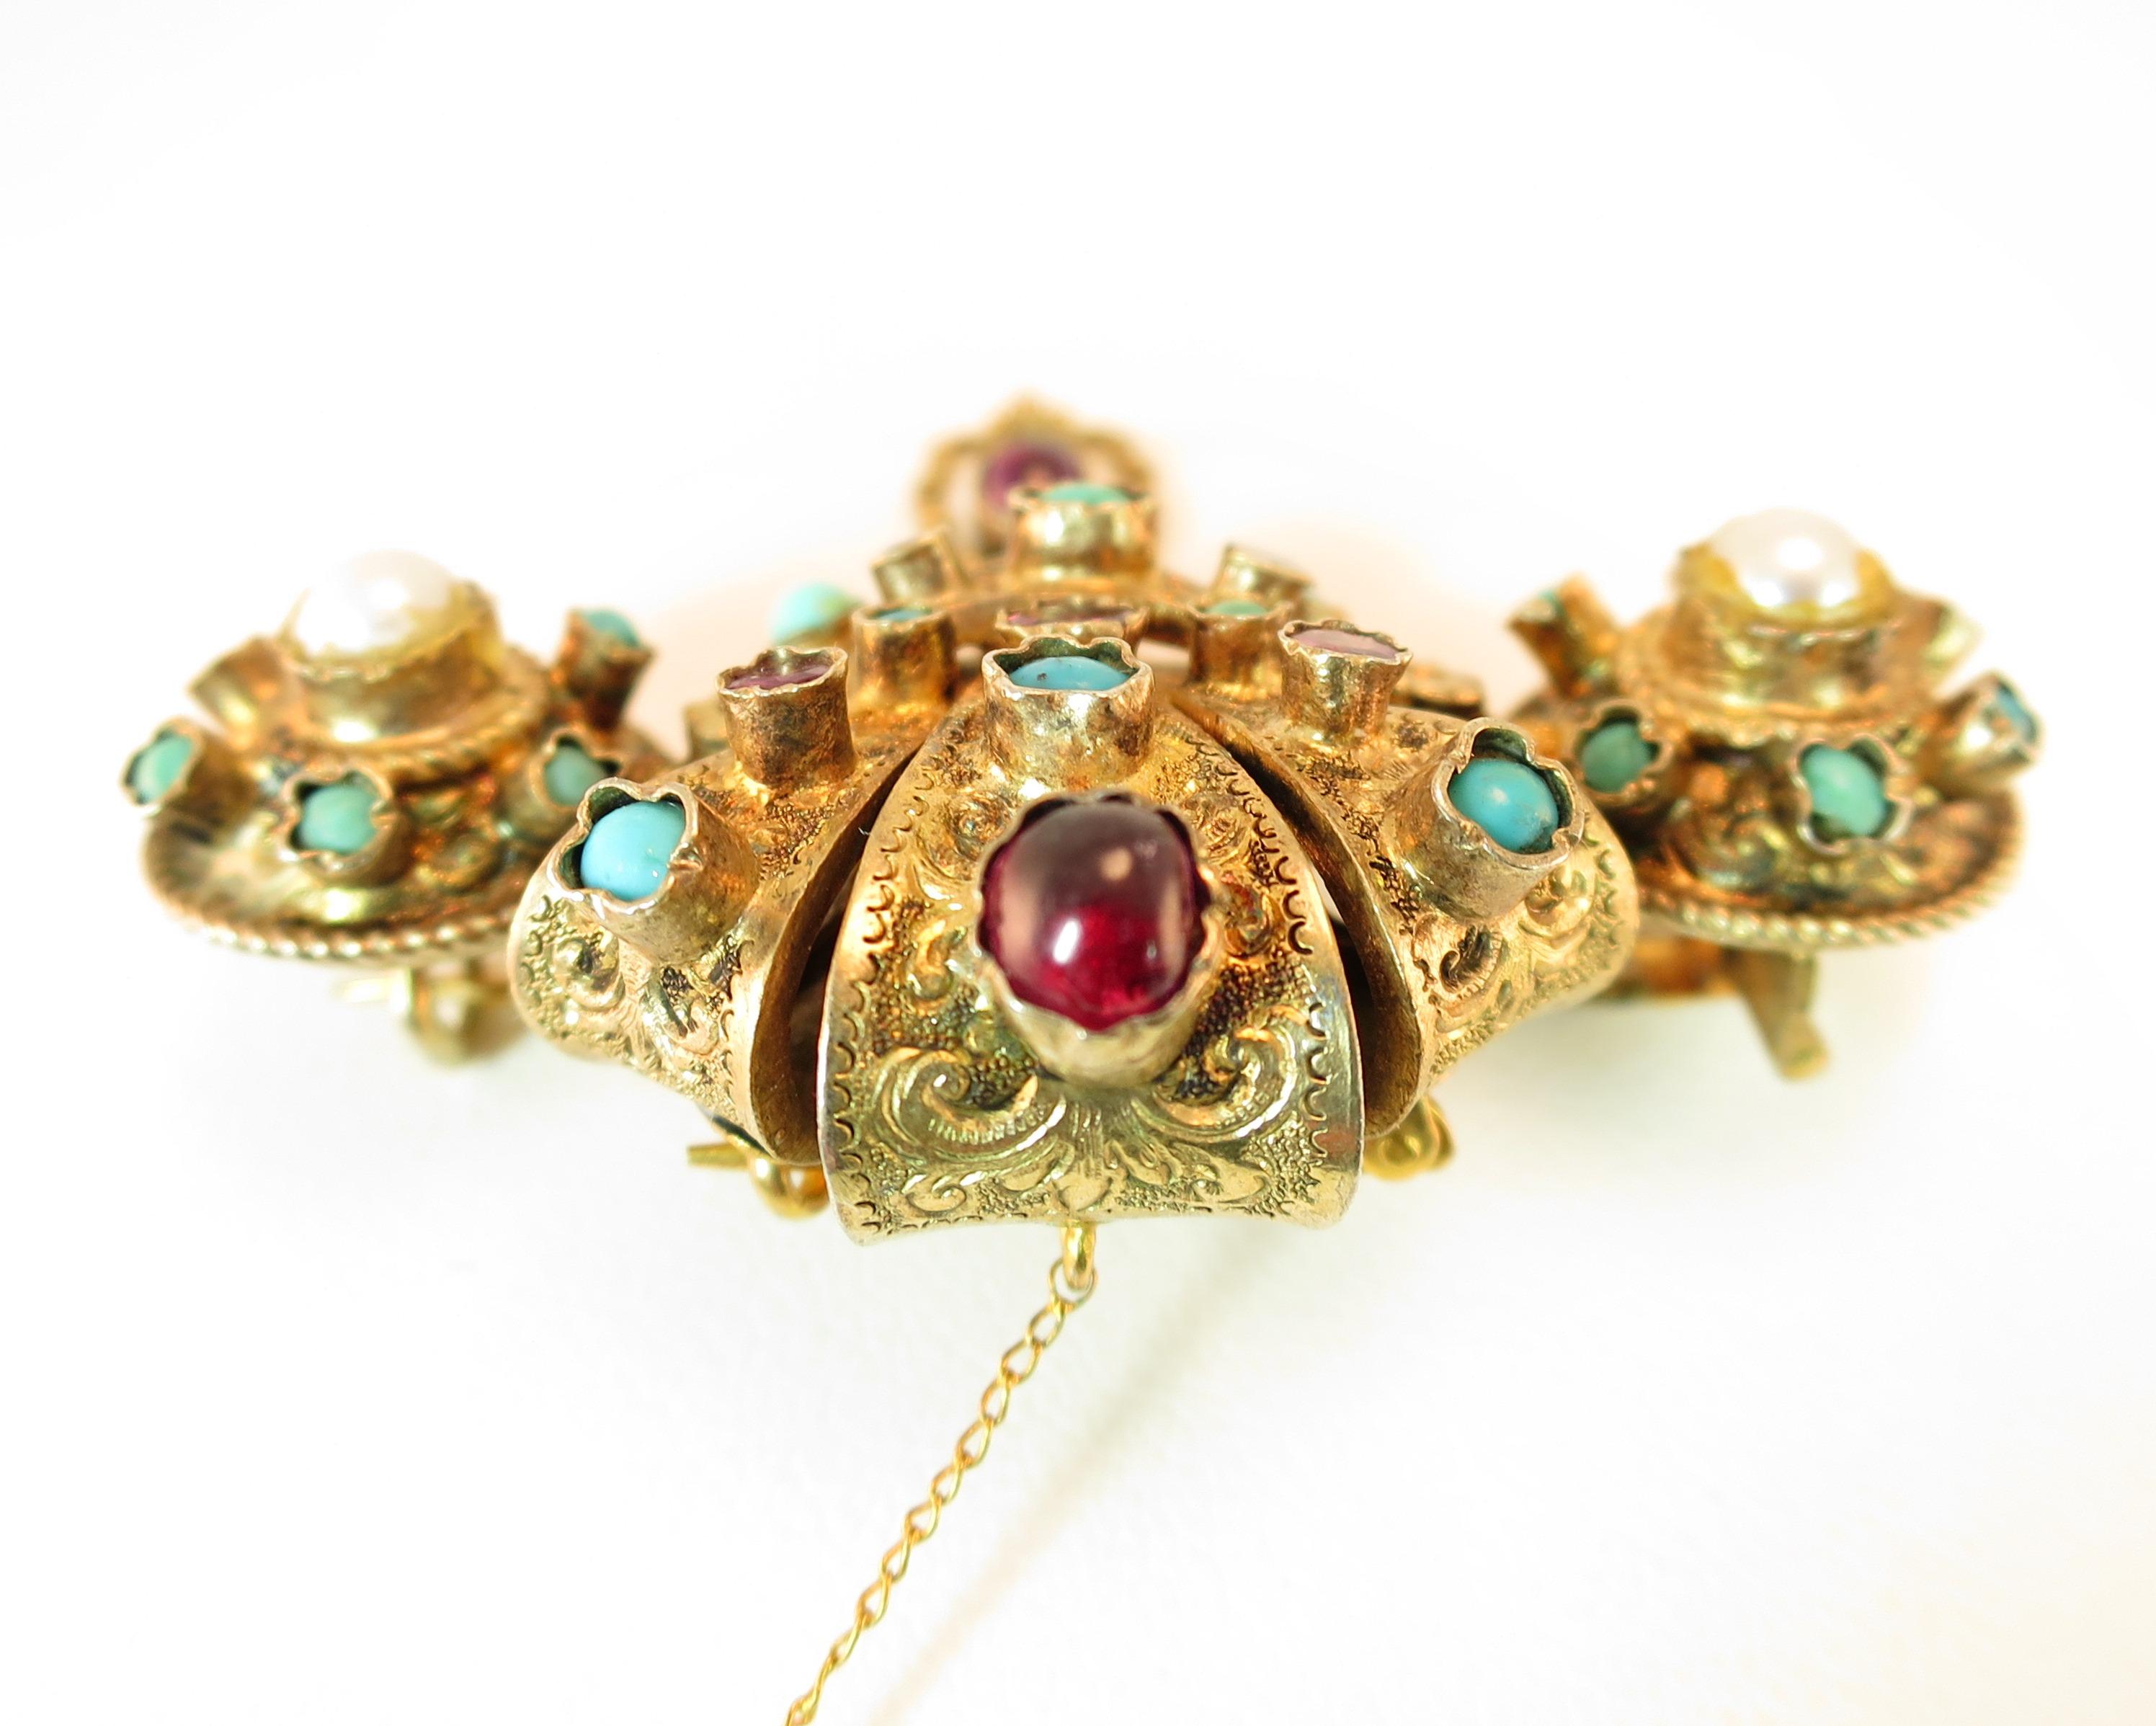 Georgian Baroque Brooch 10k Gold Amethyst Turquoise Pearls Circa 1840 For Sale 2